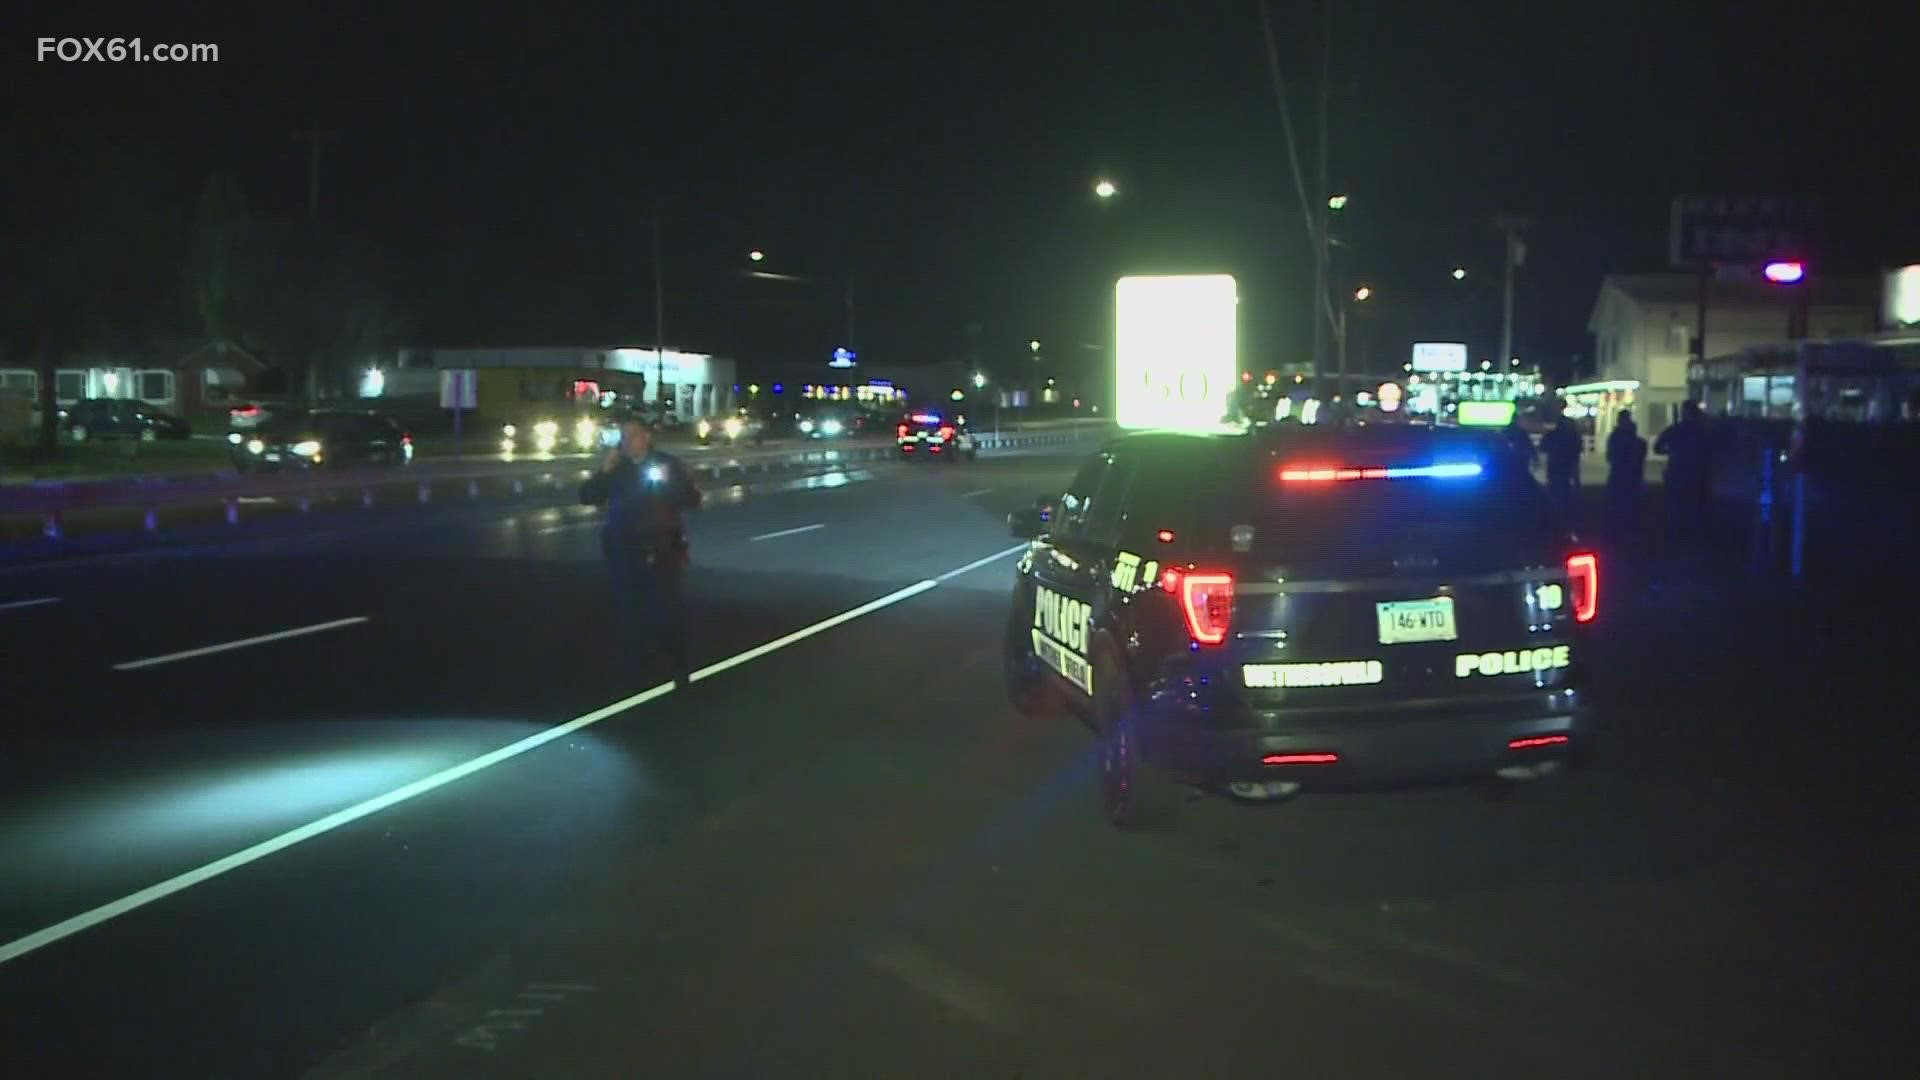 At approximately 8:21 PM, the Wethersfield Police Department say they received numerous 911 calls reporting that a pedestrian had been struck by a vehicle.